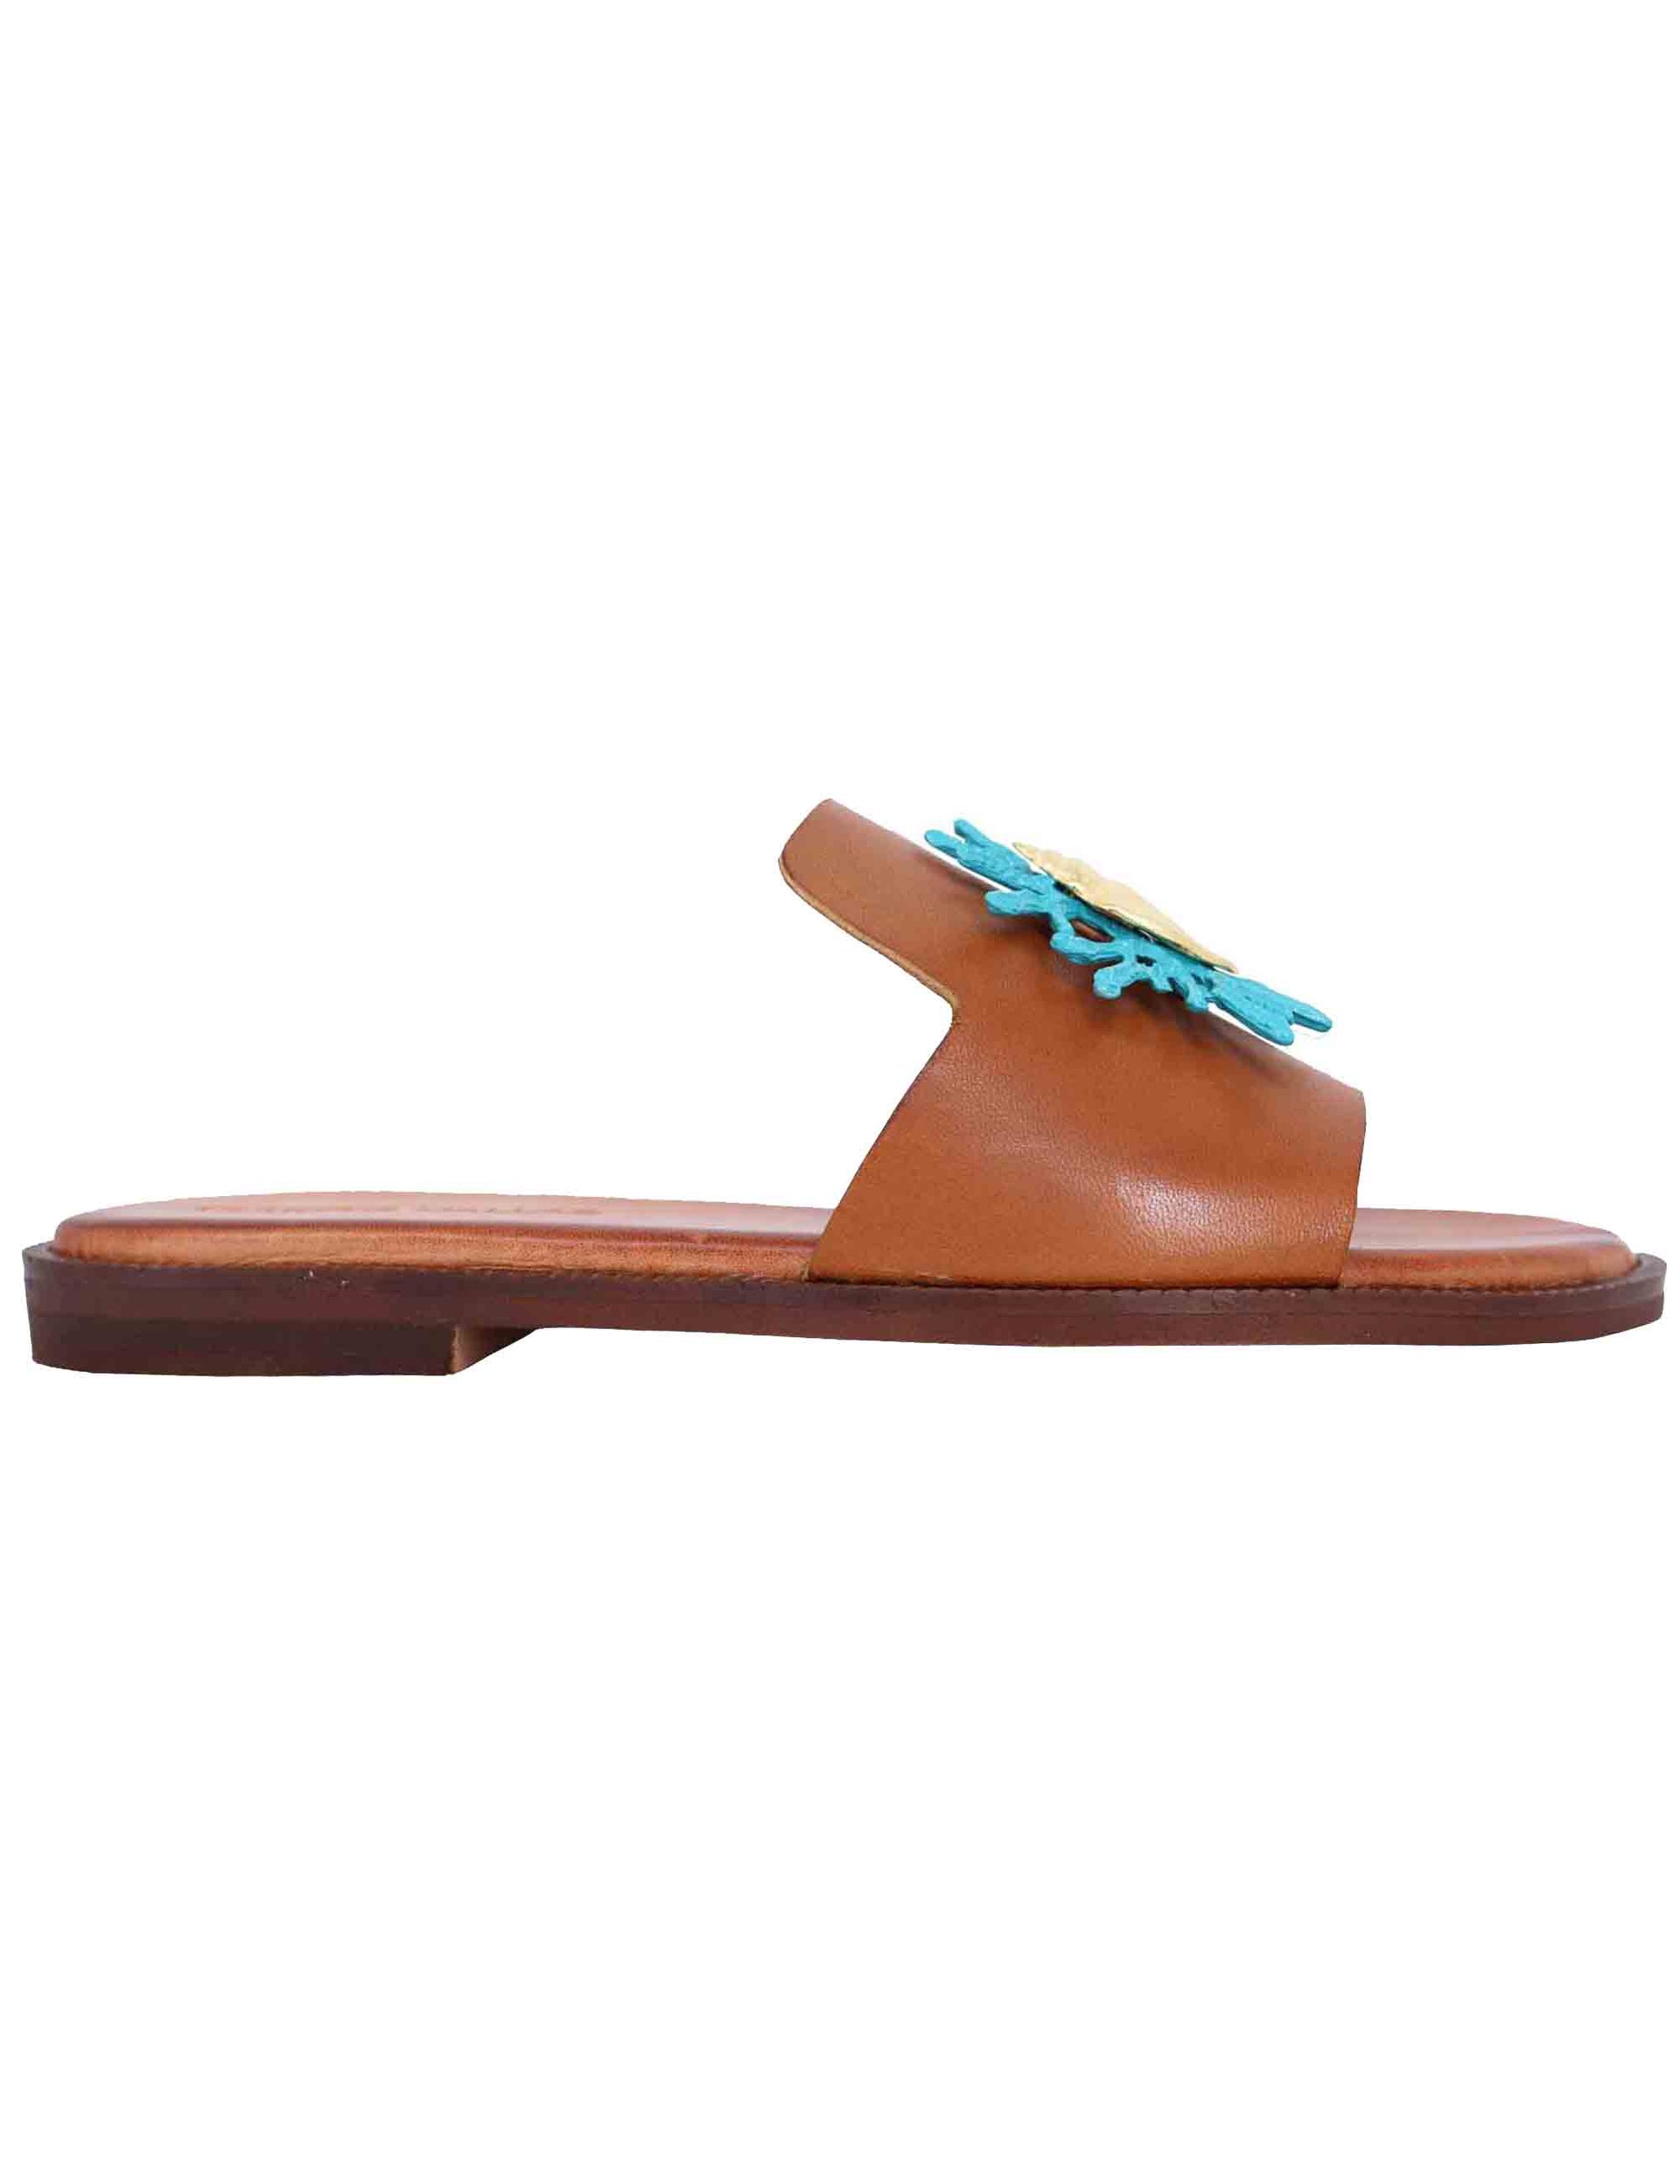 Women's flat sandals in tan leather with turquoise accessory